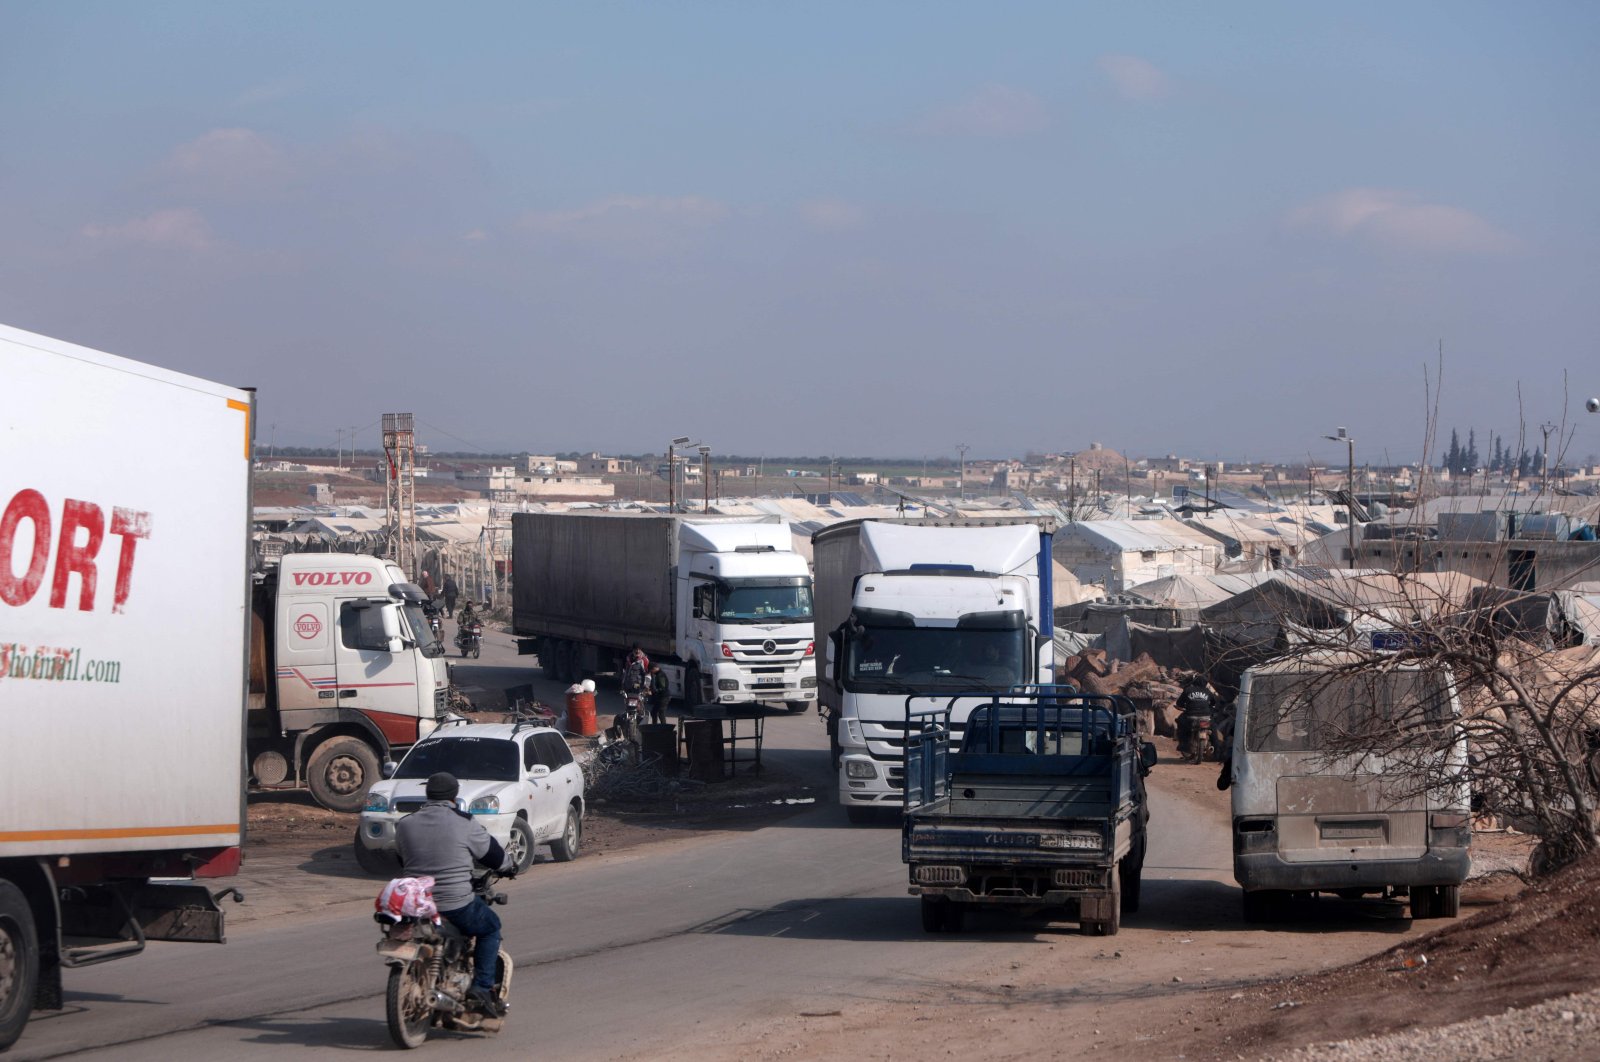 A convoy of trucks from Doctors Without Borders (MSF), carrying aid to earthquake victims, drives past tents sheltering survivors, after entering Syria from Türkiye via the al-Hamam border crossing in the countryside of Jindayris in northwestern Syria, on Feb.19, 2023. (AFP Photo)